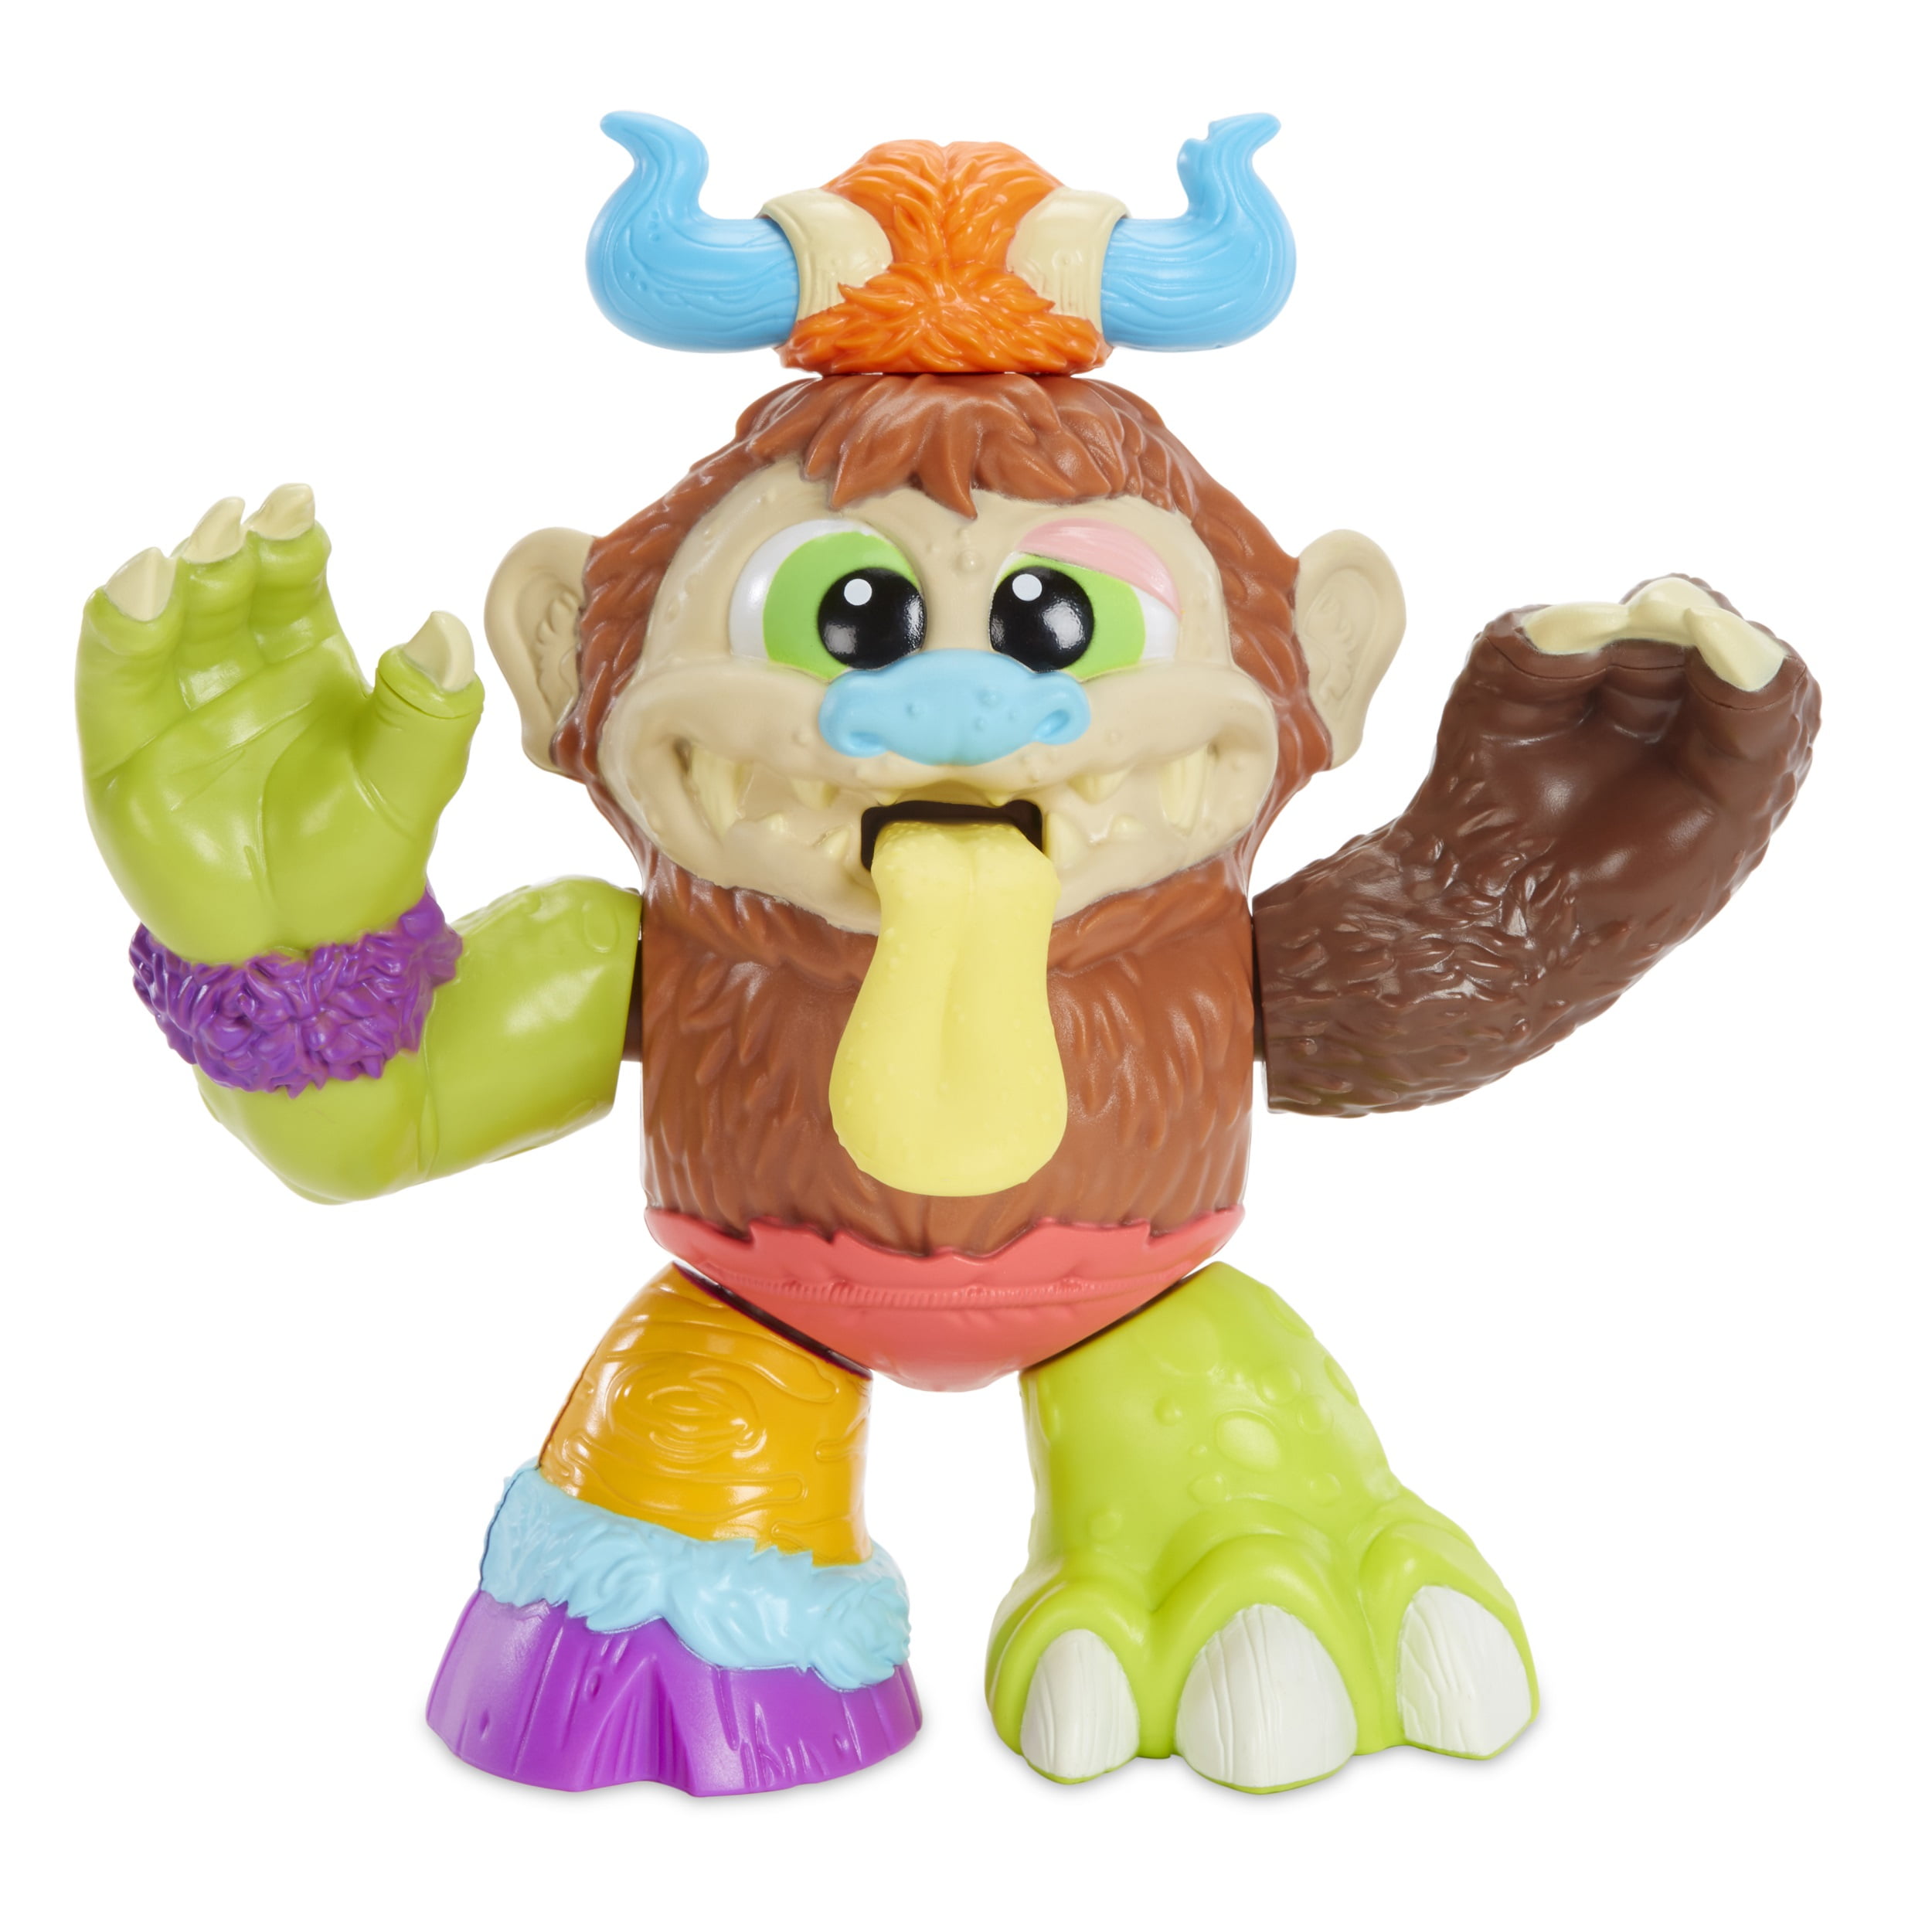 MGA Entertainment Crate Creatures Surprise Pudge for sale online 